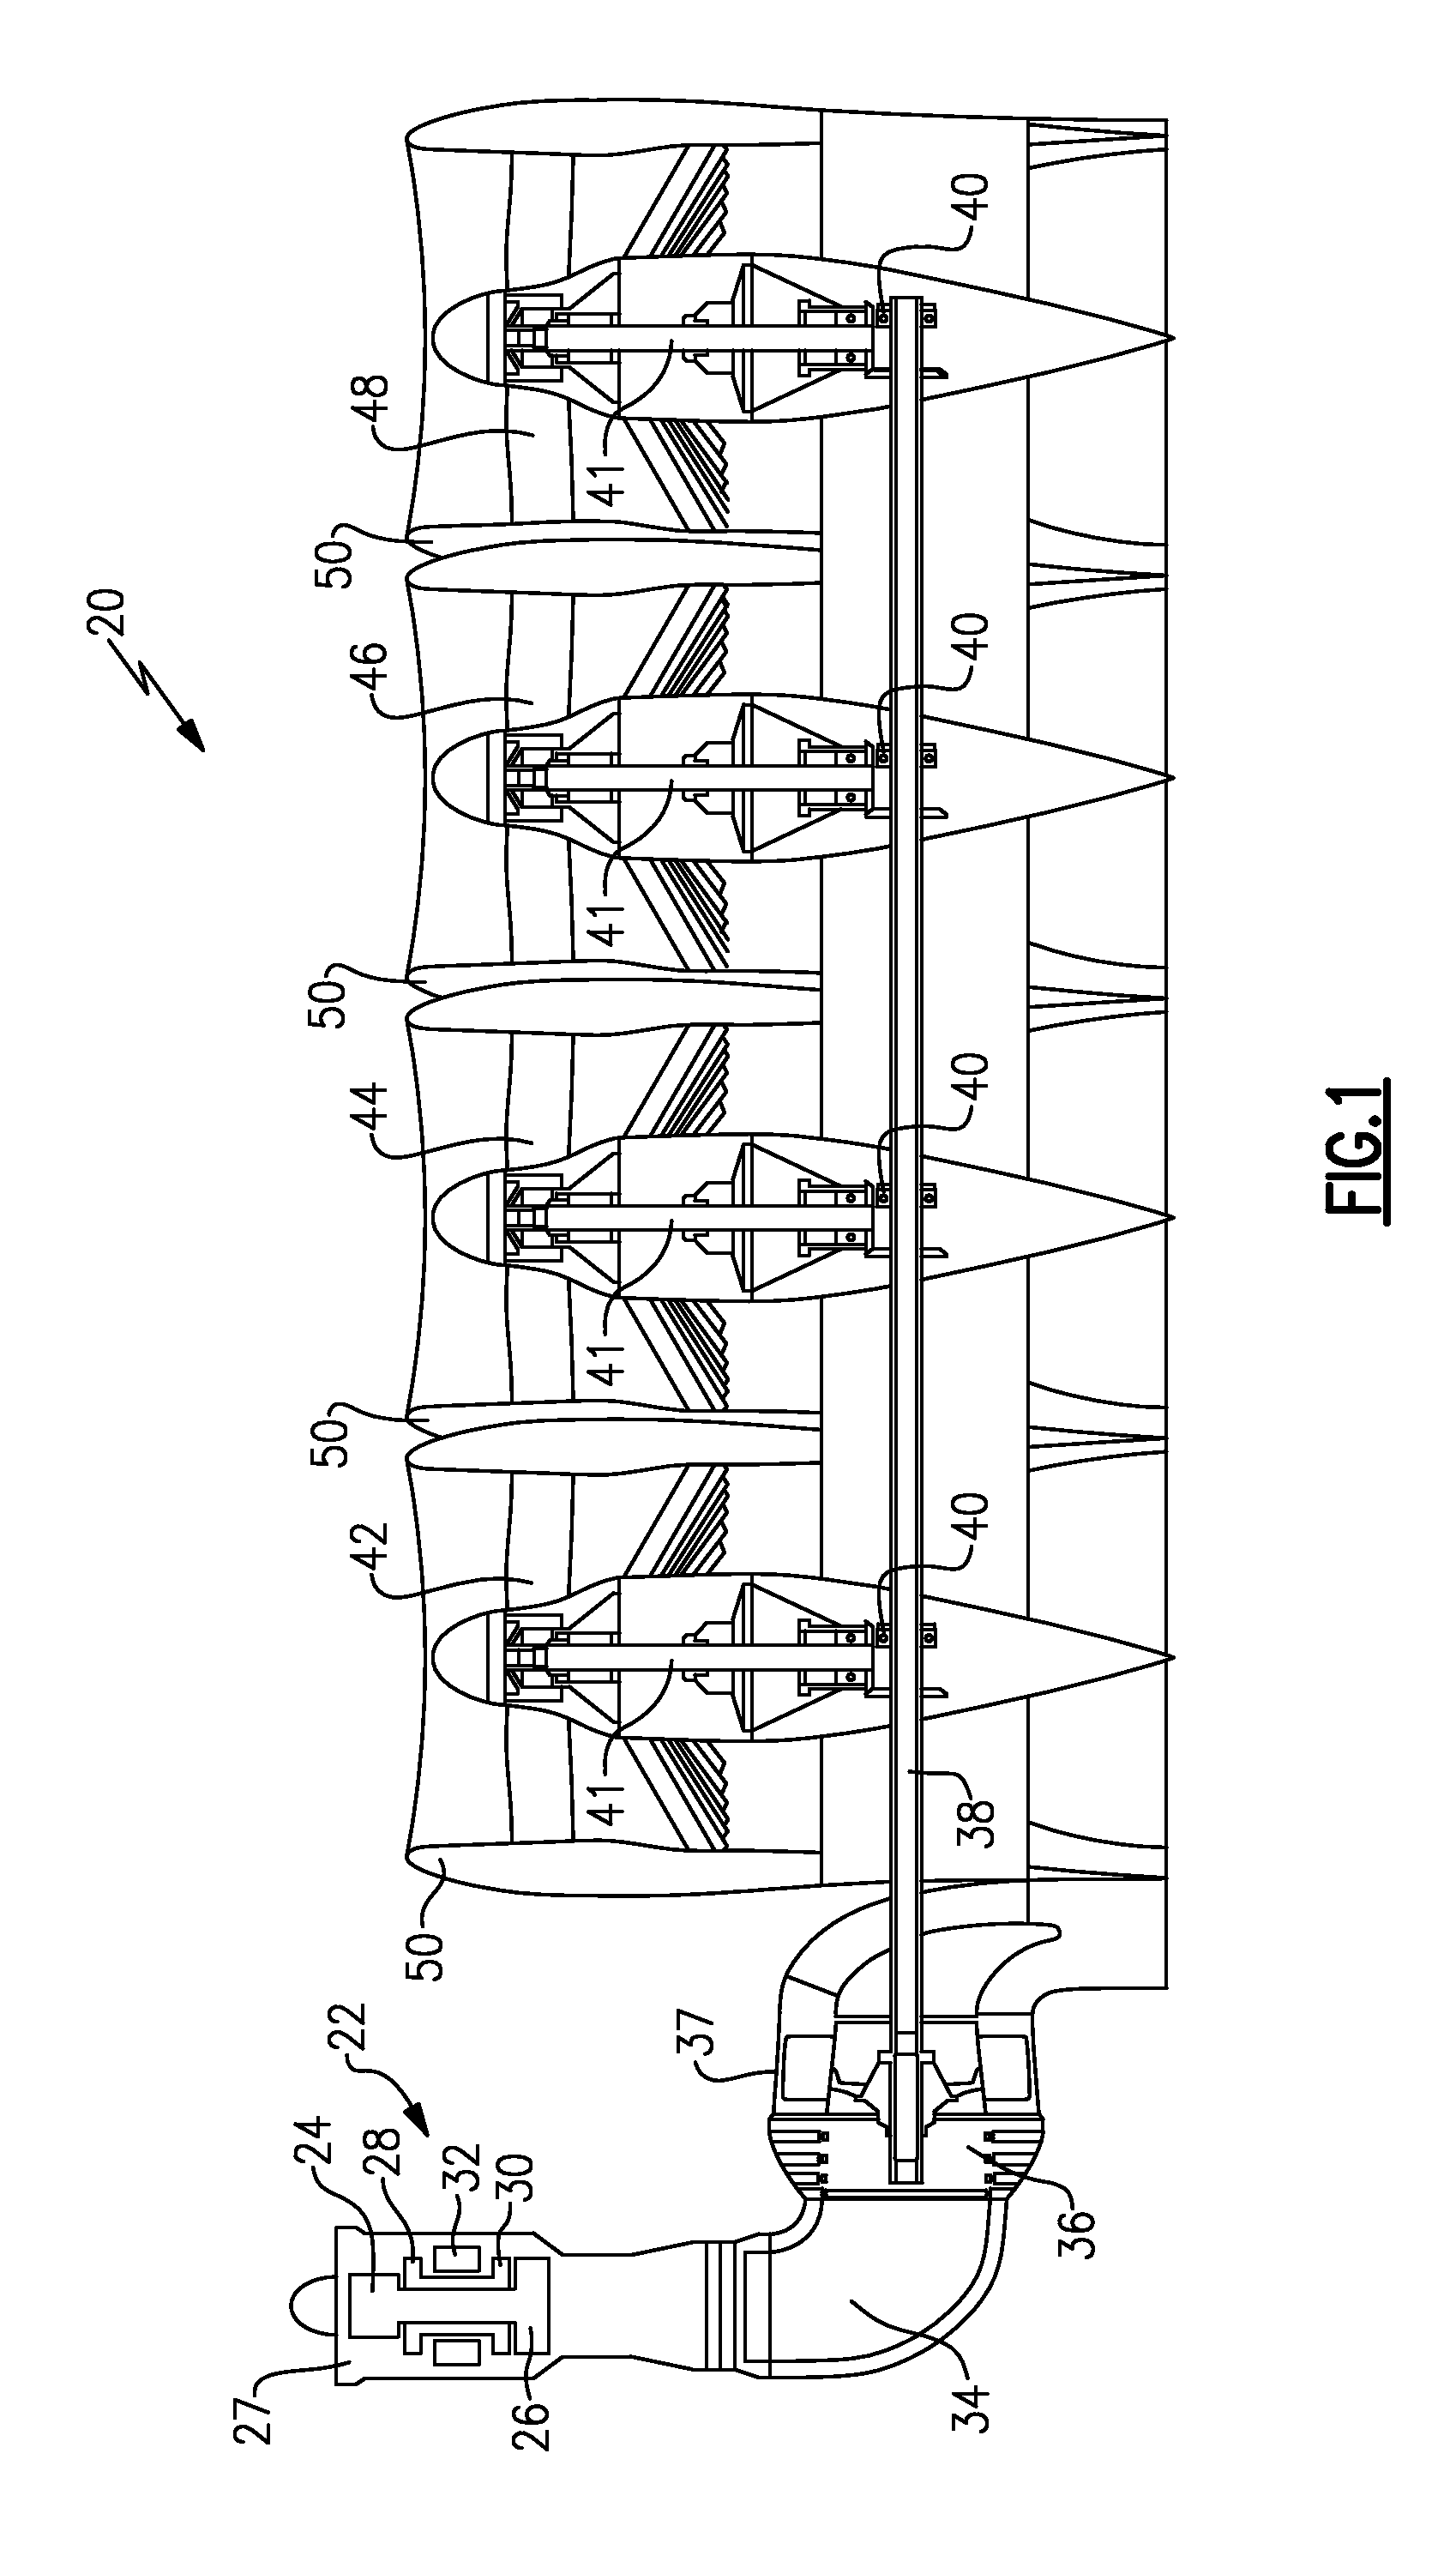 Gas turbine engine with distributed fans